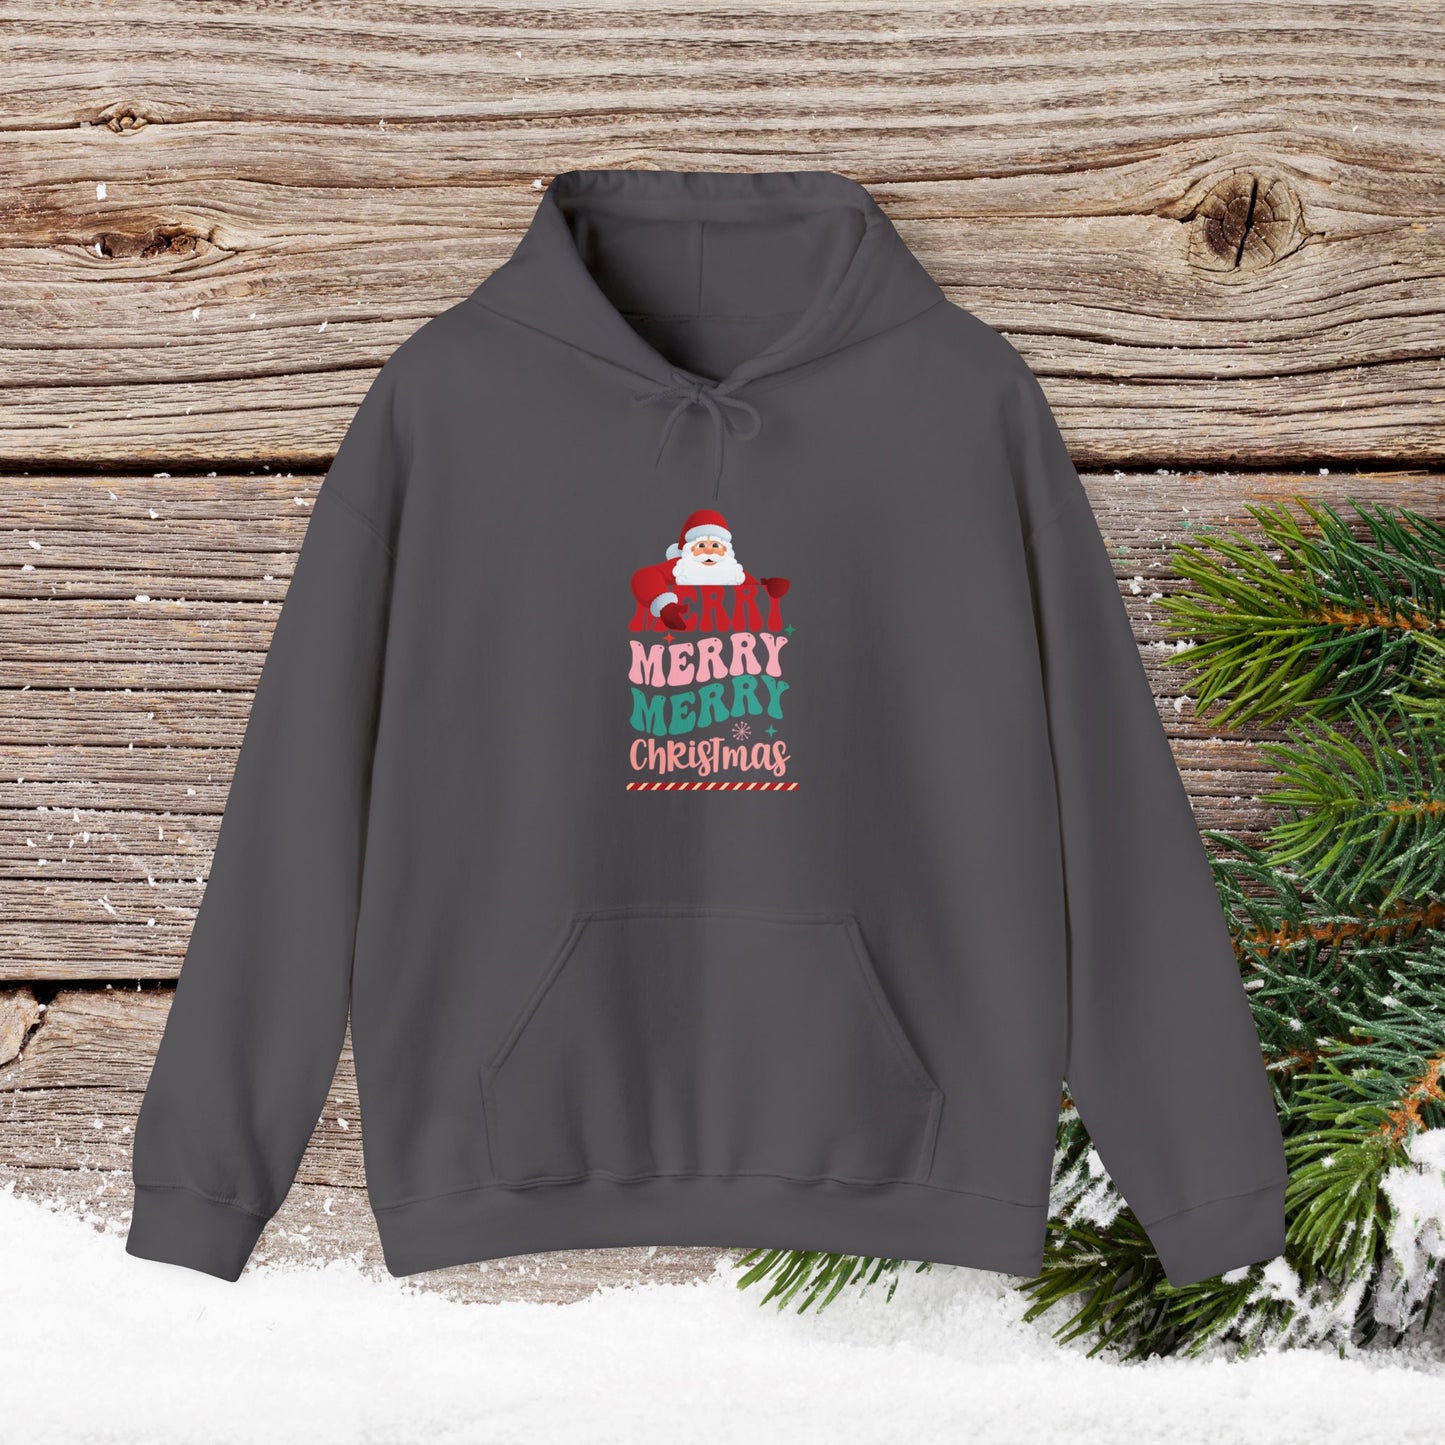 Christmas Hoodie - Merry Merry Merry Christmas - Cute Christmas Shirts - Youth and Adult Christmas Hooded Sweatshirt Hooded Sweatshirt Graphic Avenue Charcoal Adult Small 